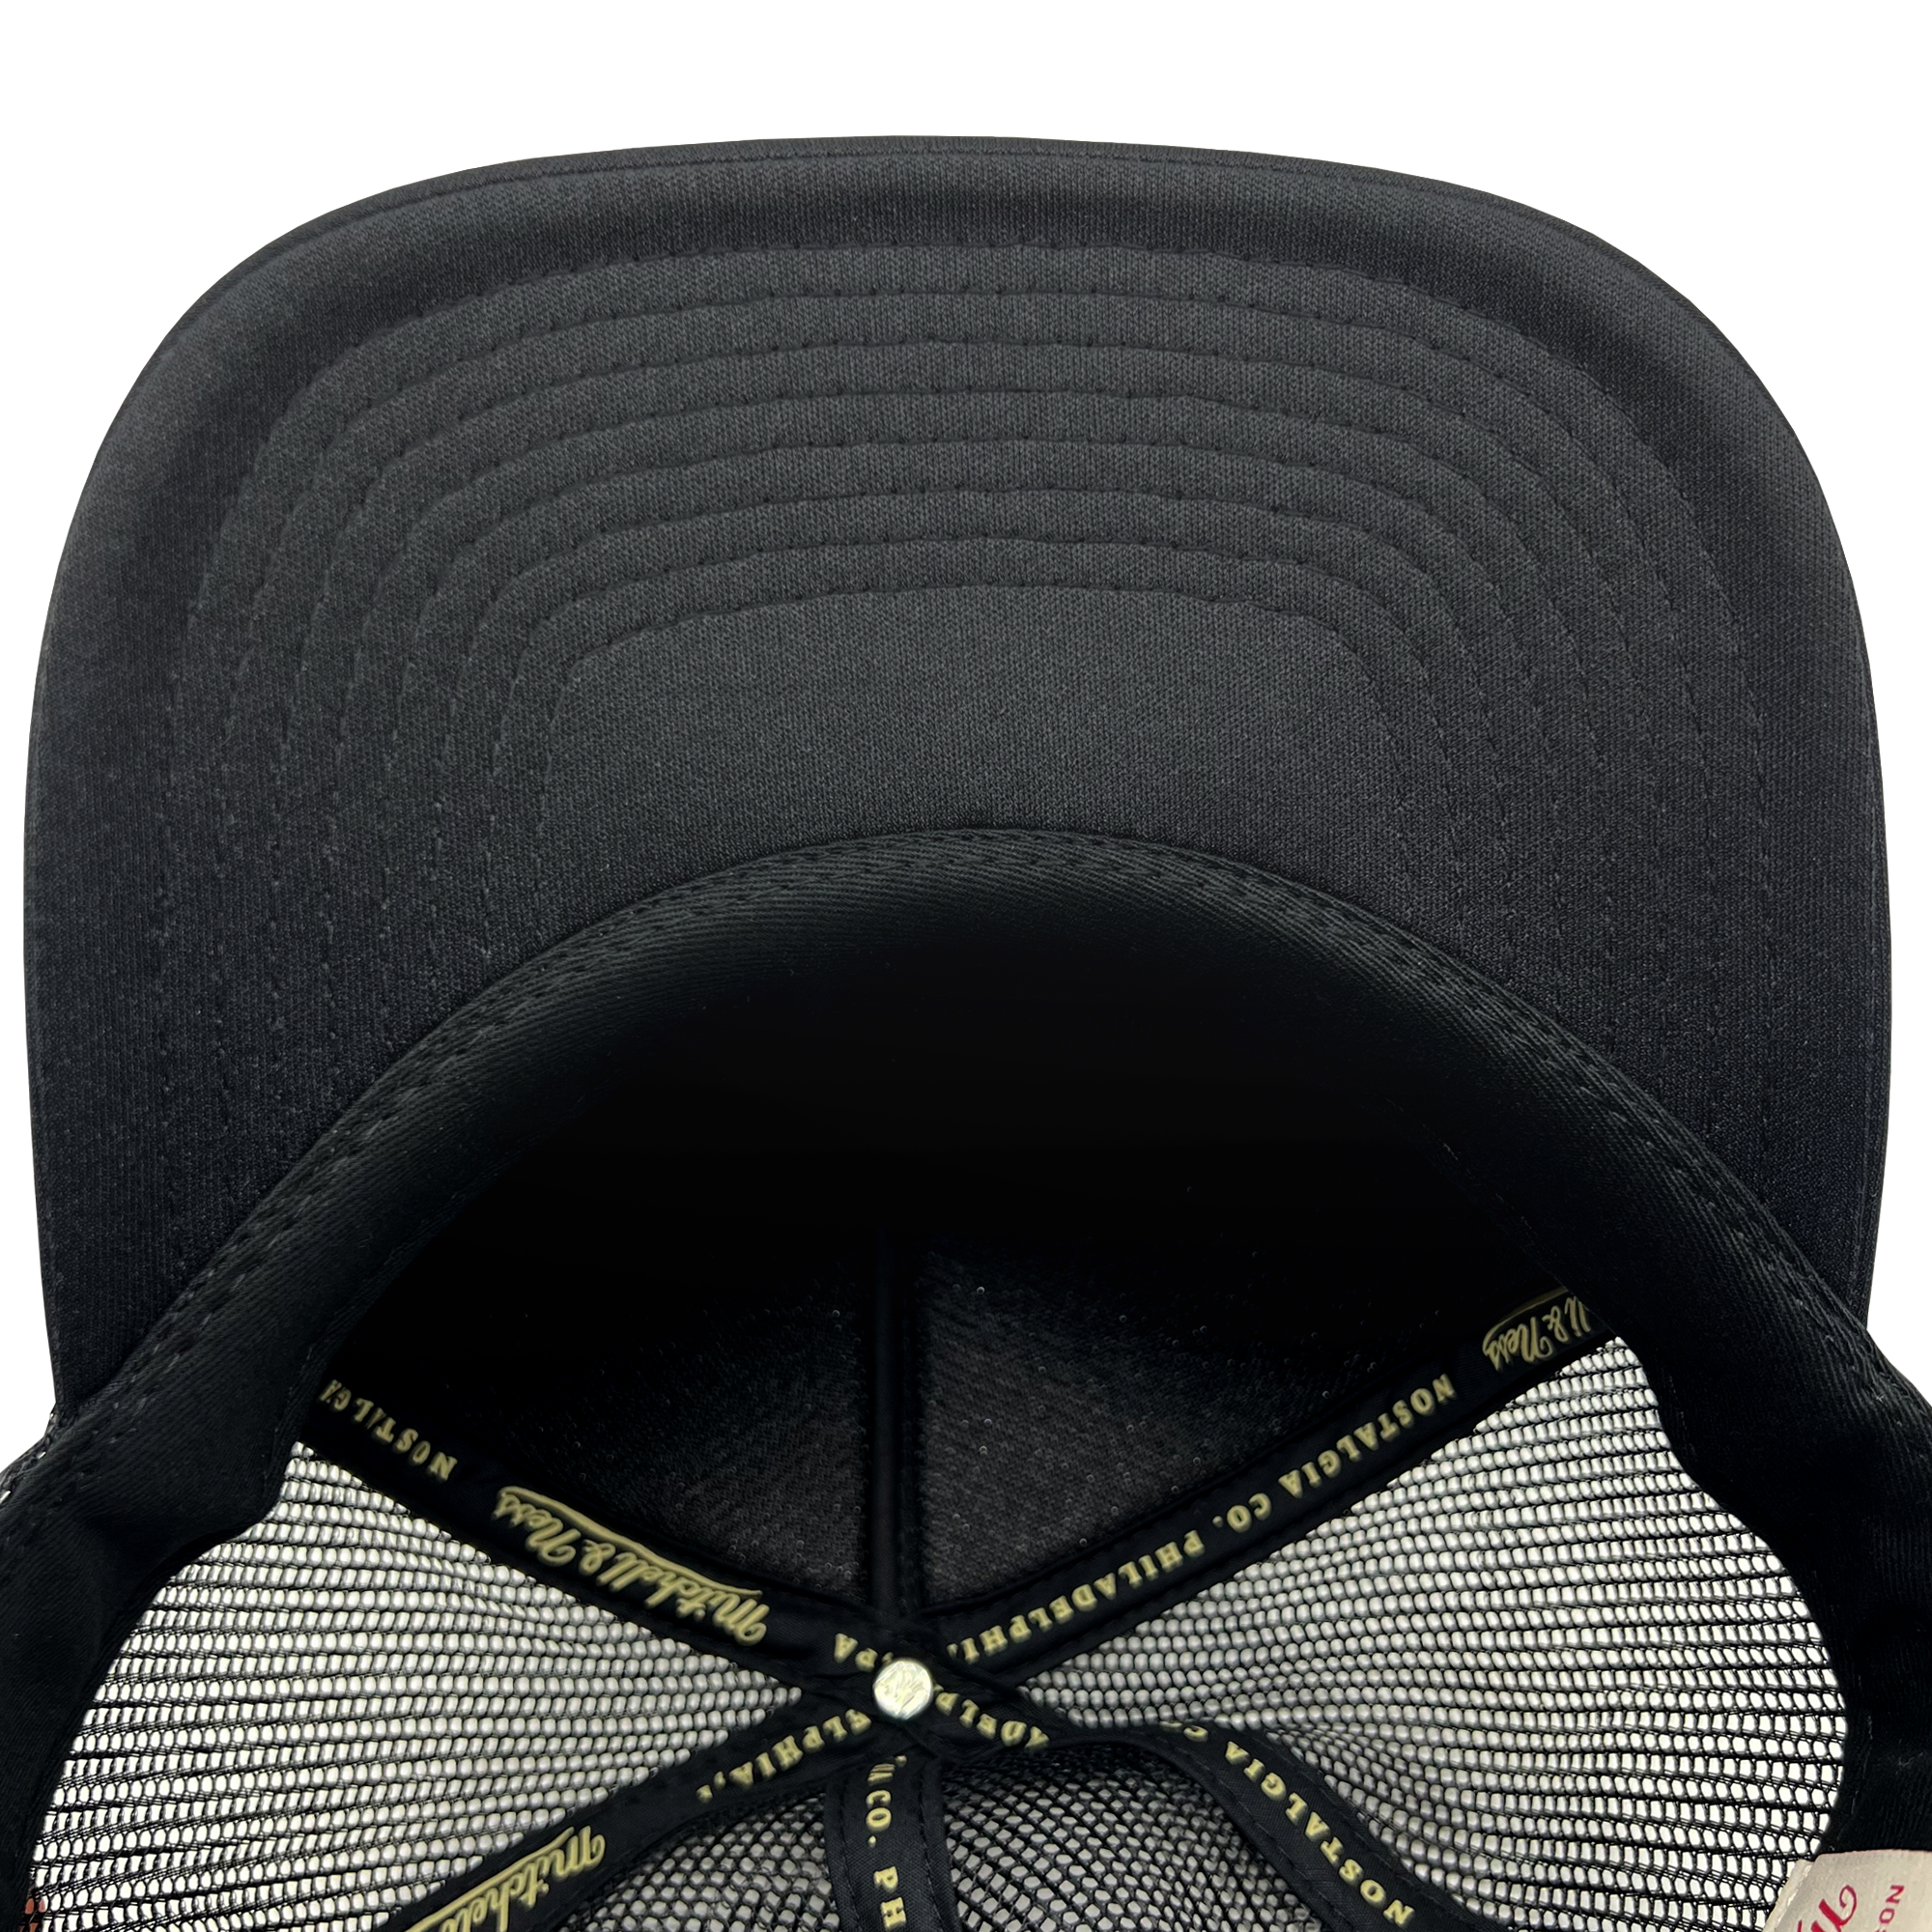 Detailed close-up of black undervisor and taping inside the crown of a black Hiero hip hop X Mitchell & Ness cap.